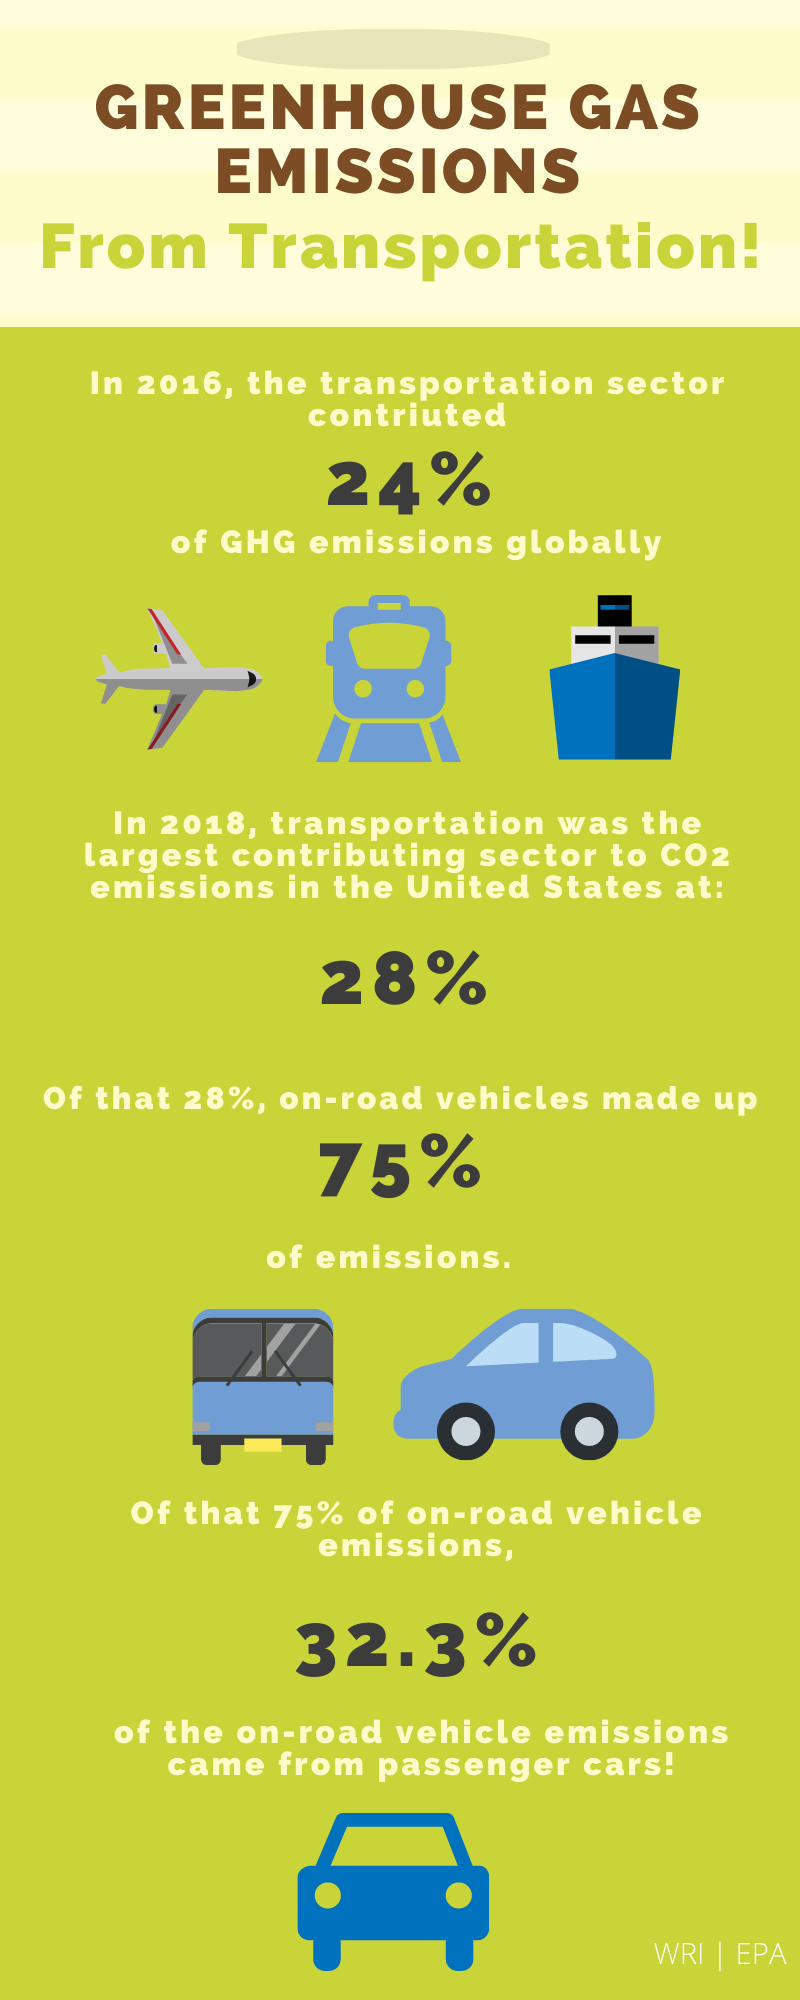 In 2016, the transportation sector contributed 24% of GHG emissions globaly. In 2018, transportation was the largest contributing sector to CO2 emissions in the US at 28%. Of that 28%, on-road vehicles made up 75% of emissions. Of that 75% of on-road vehicle emissions, 32% of the on-road vehicle emissions came from passenger cars!